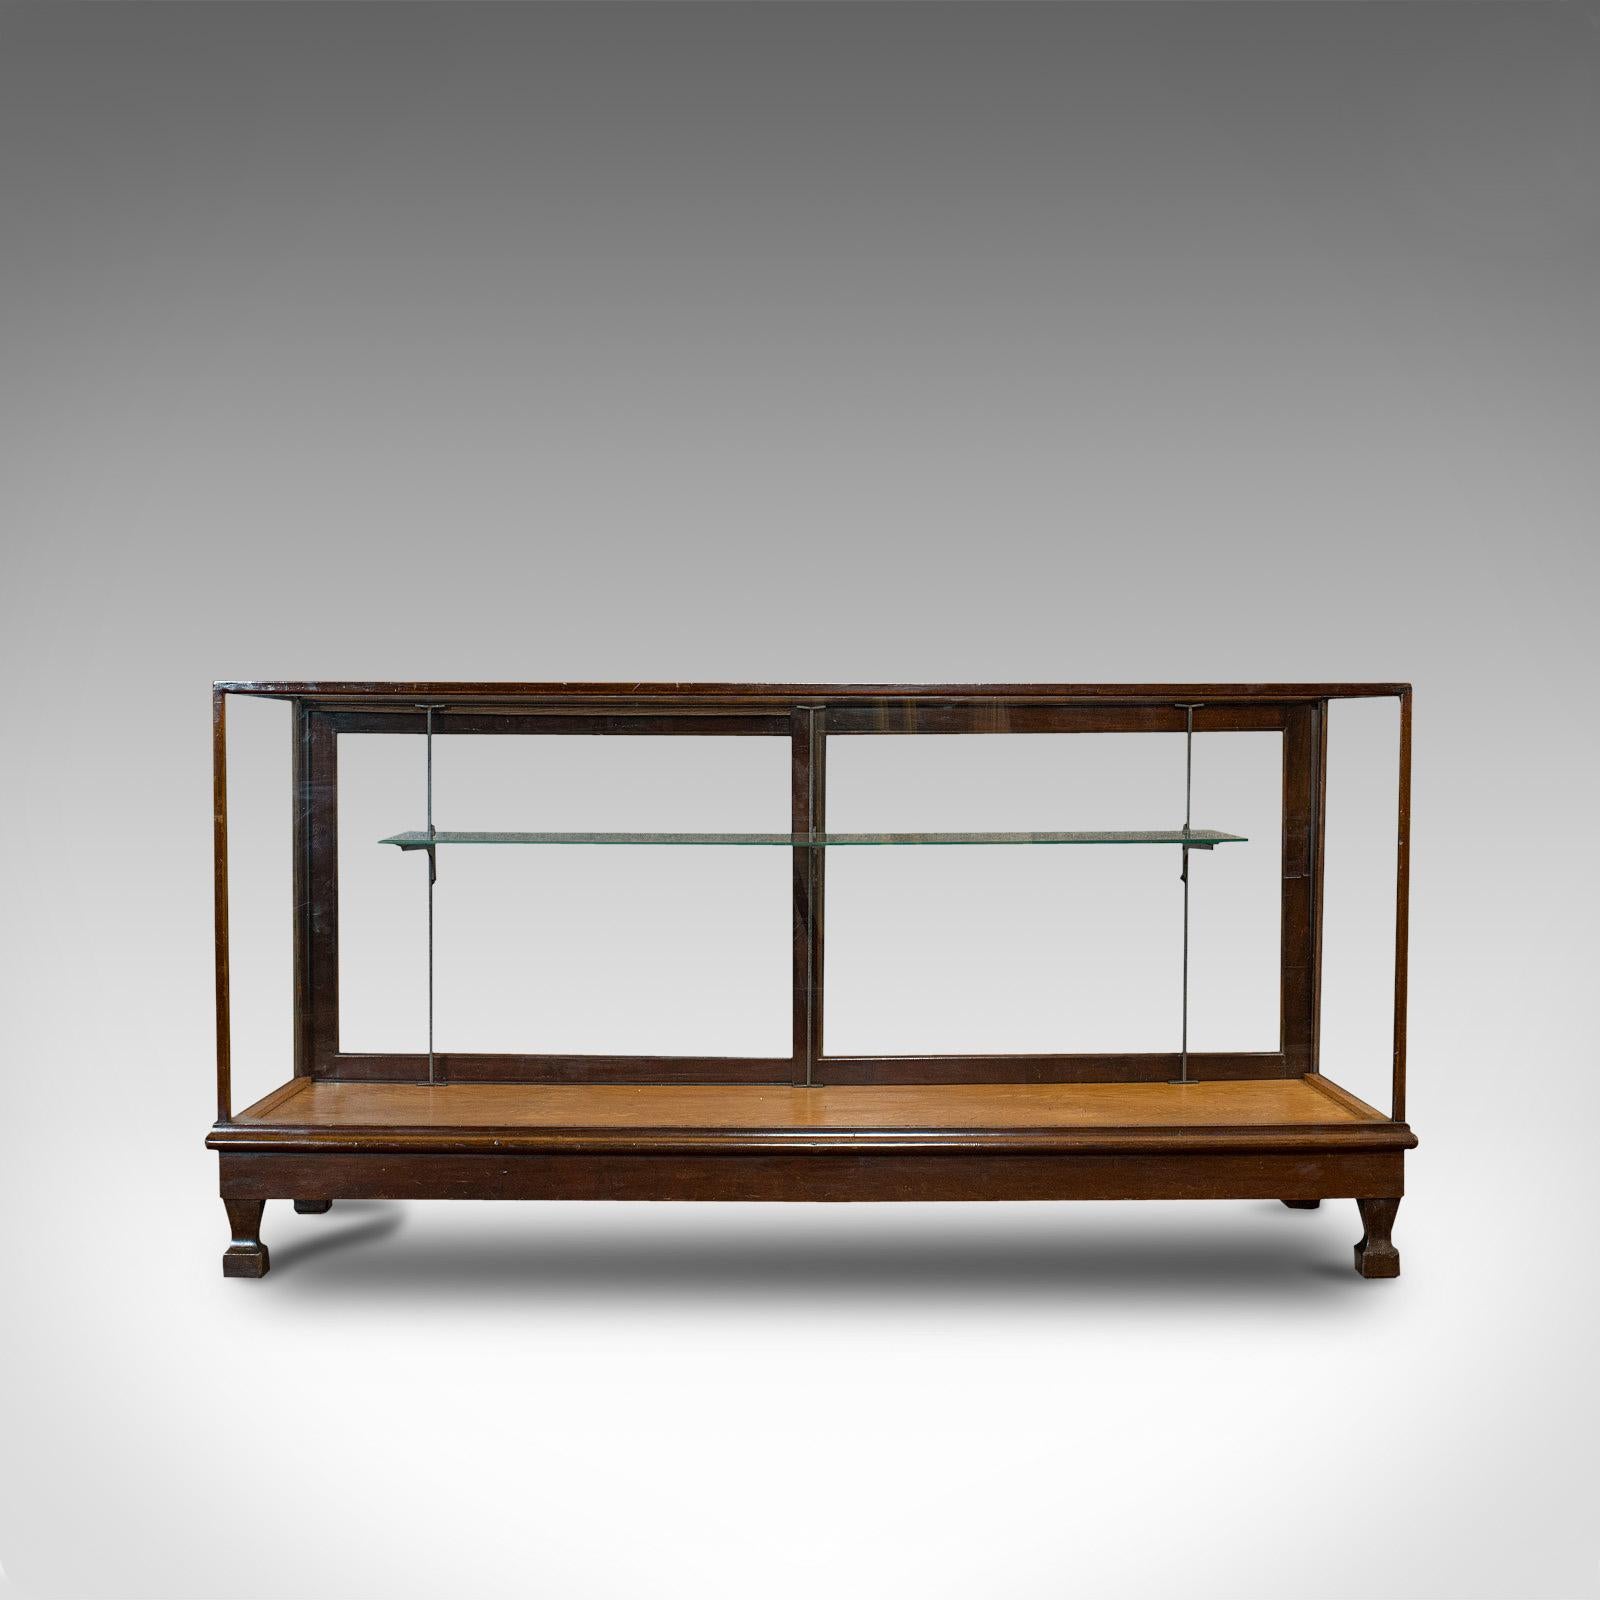 This is a large antique shop display cabinet. An English, oak and glass showcase, dating to the Edwardian period, circa 1910.

Grand display case makes for superb viewing
Displays a desirable aged patina
Select oak offers fine grain